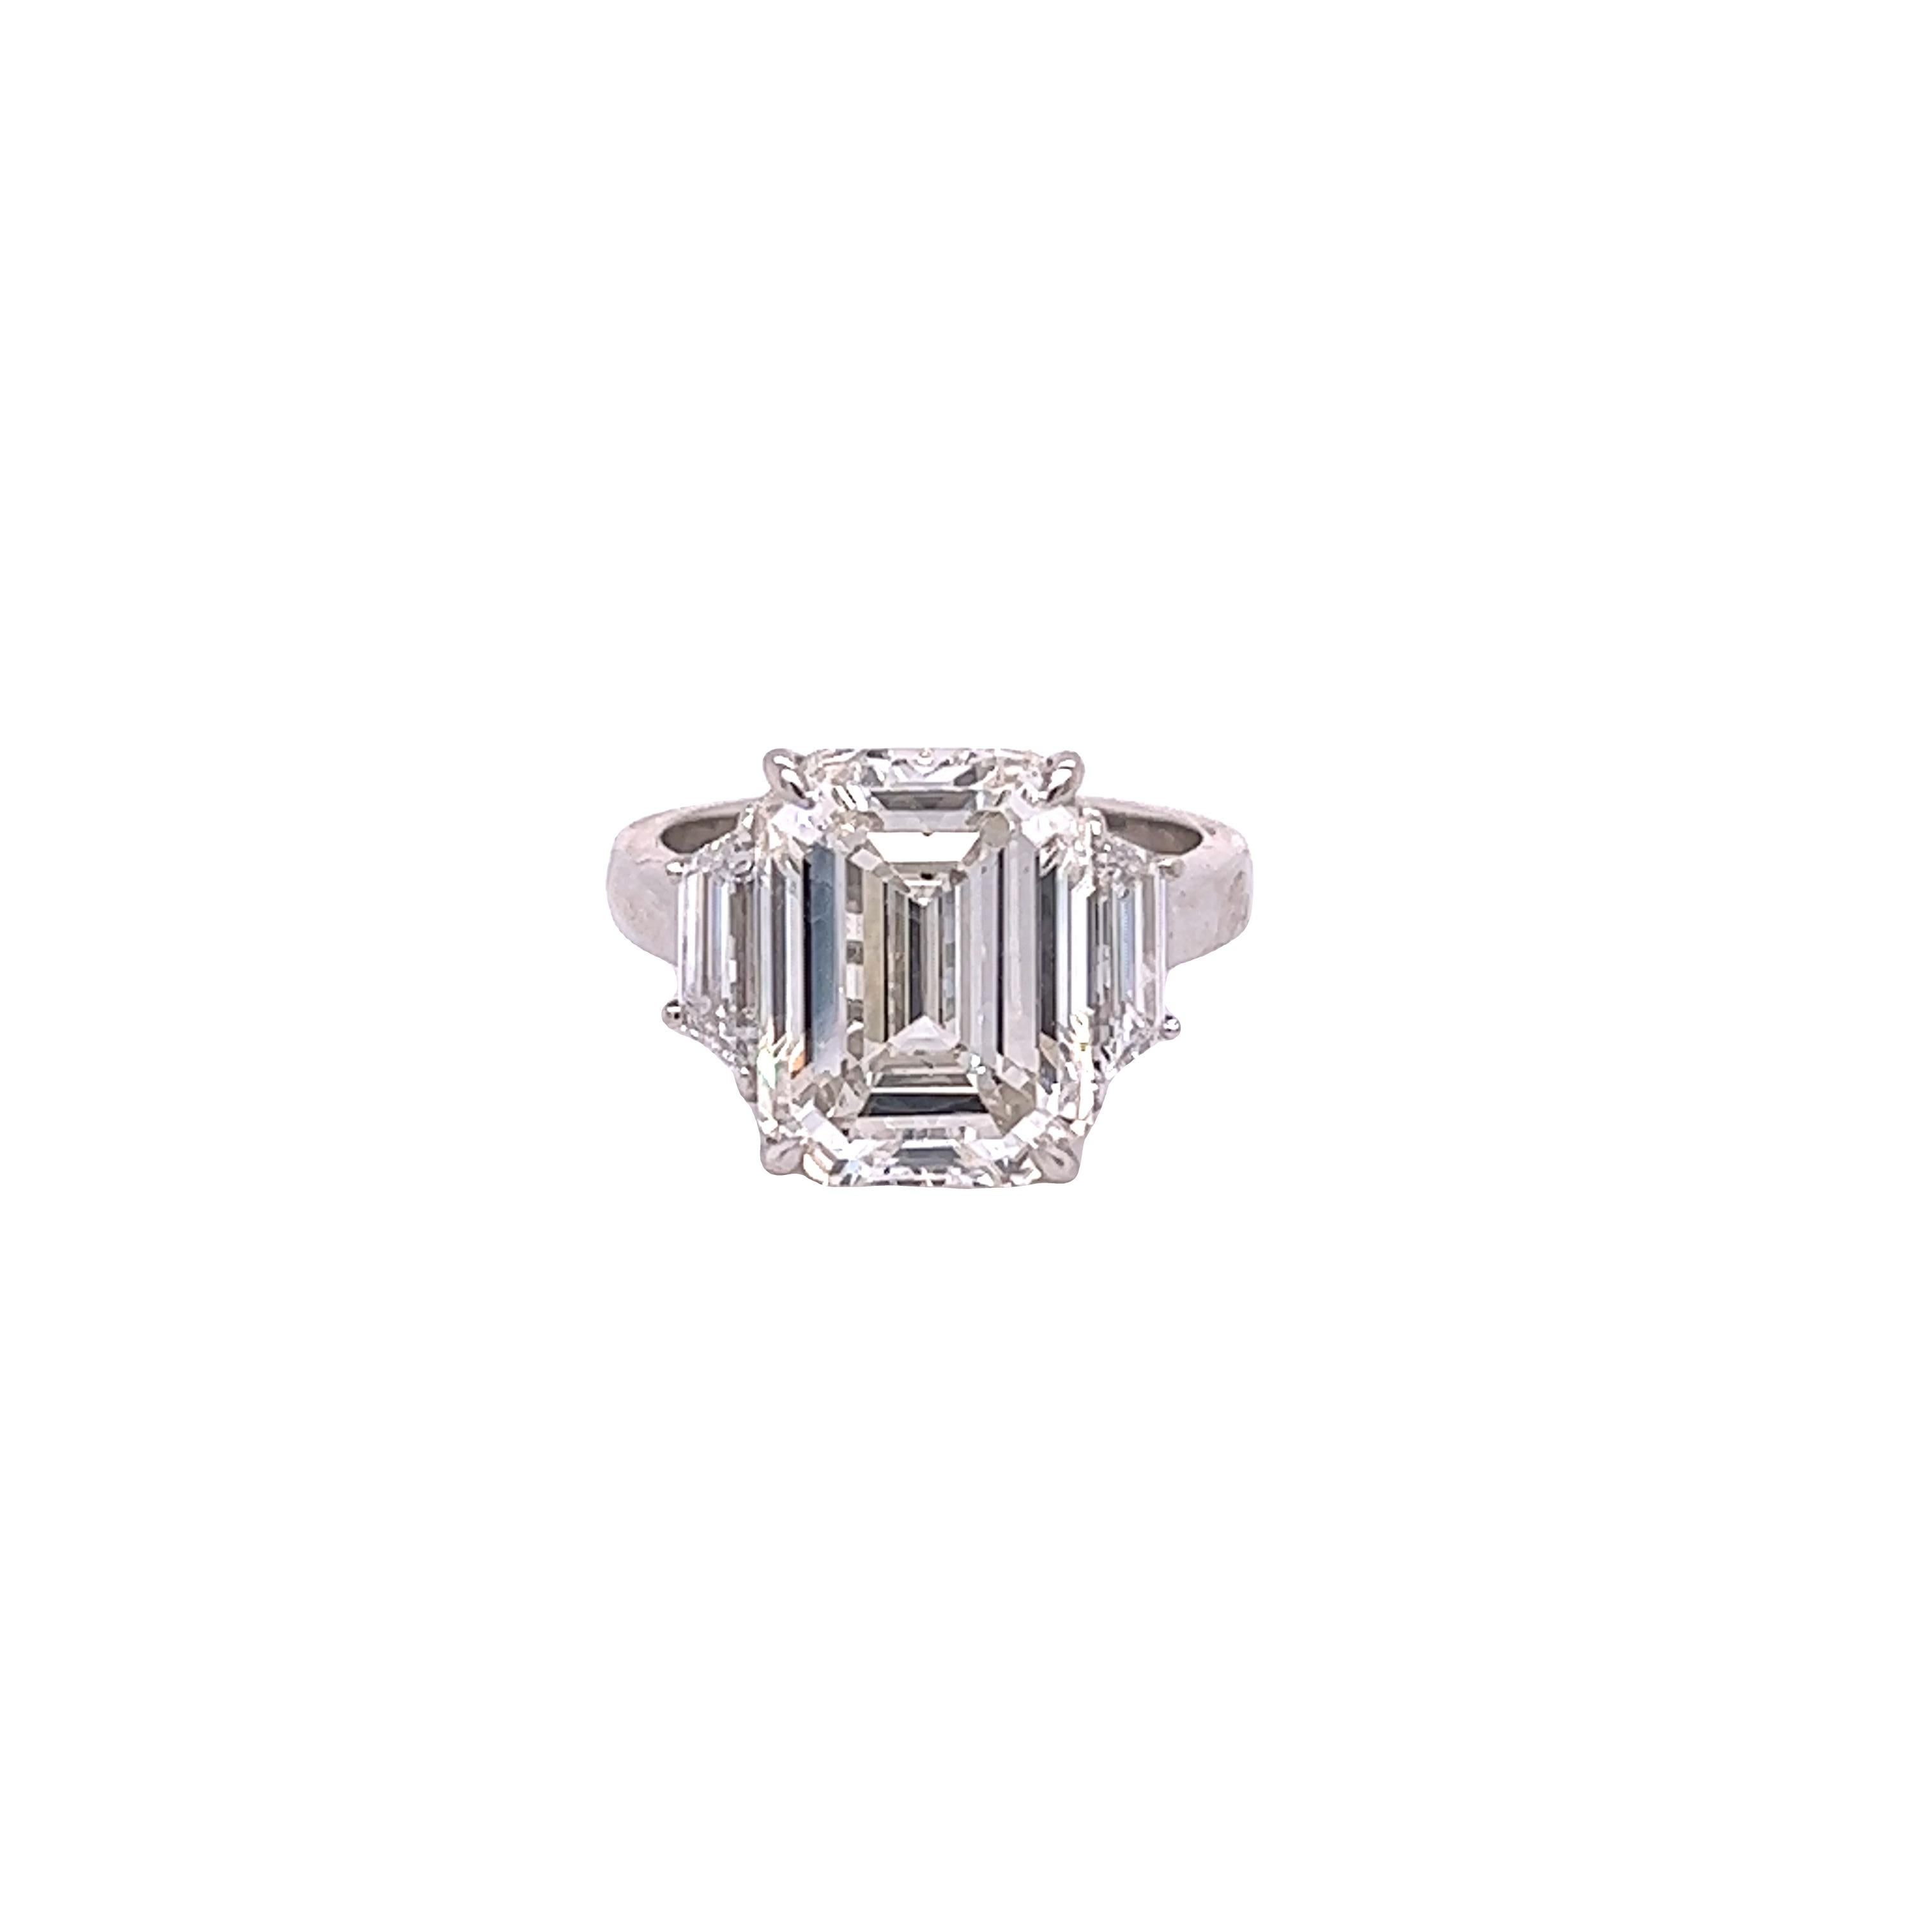 Rosenberg Diamonds & Co. 7.94 carat Emerald cut J color SI2 clarity is accompanied by a GIA certificate. This spectacular Emerald is set in a handmade platinum setting with perfectly matched pair of step cut trapezoid side stones flanking on both